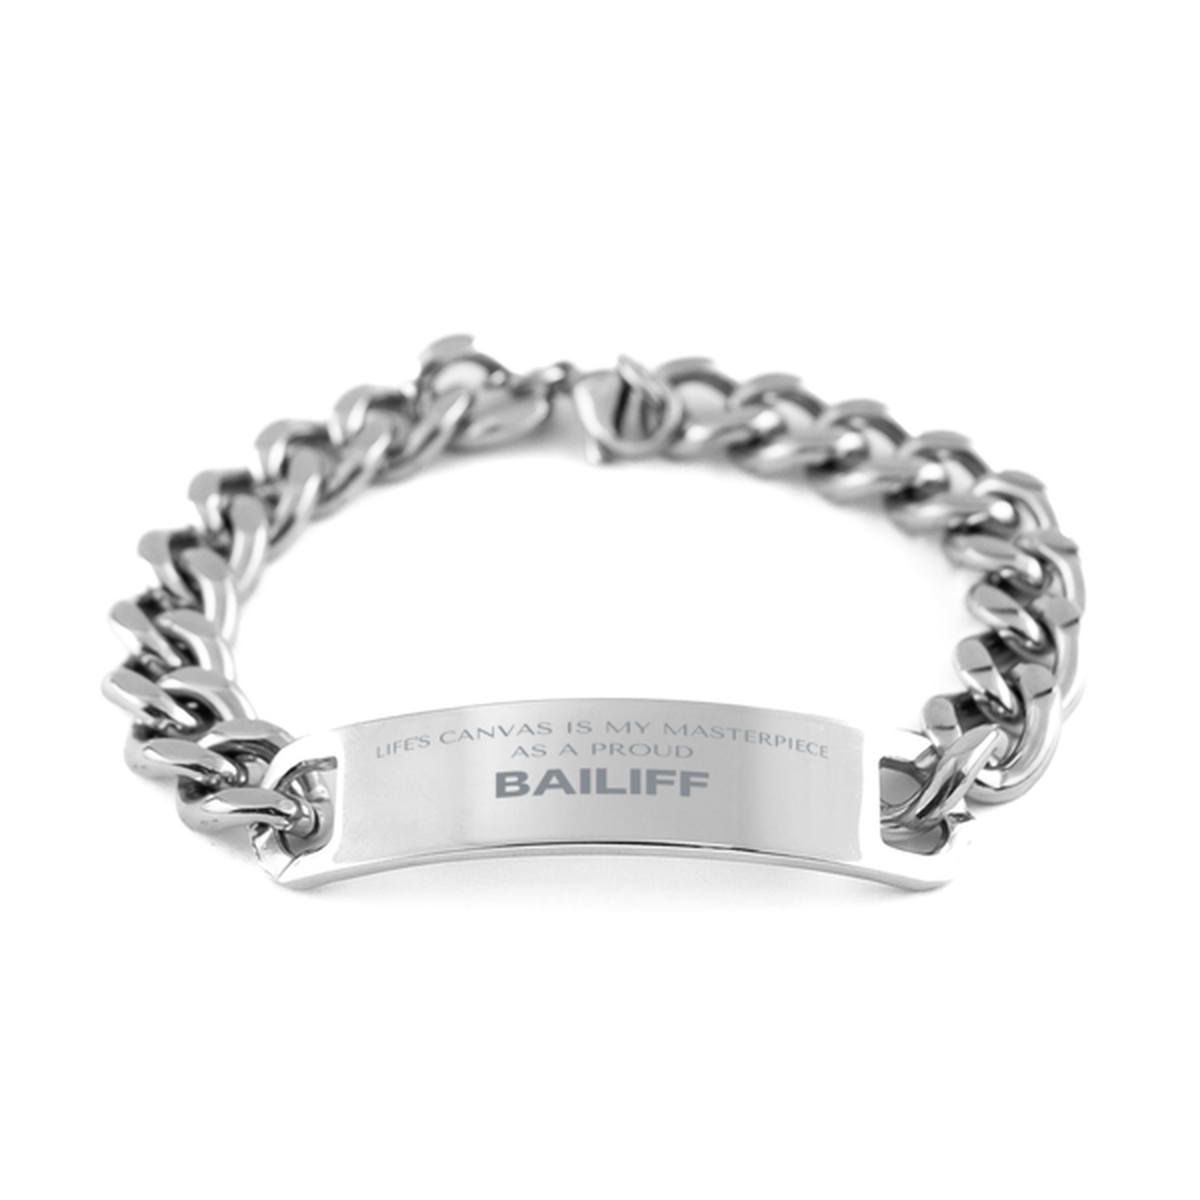 Proud Bailiff Gifts, Life's canvas is my masterpiece, Epic Birthday Christmas Unique Cuban Chain Stainless Steel Bracelet For Bailiff, Coworkers, Men, Women, Friends